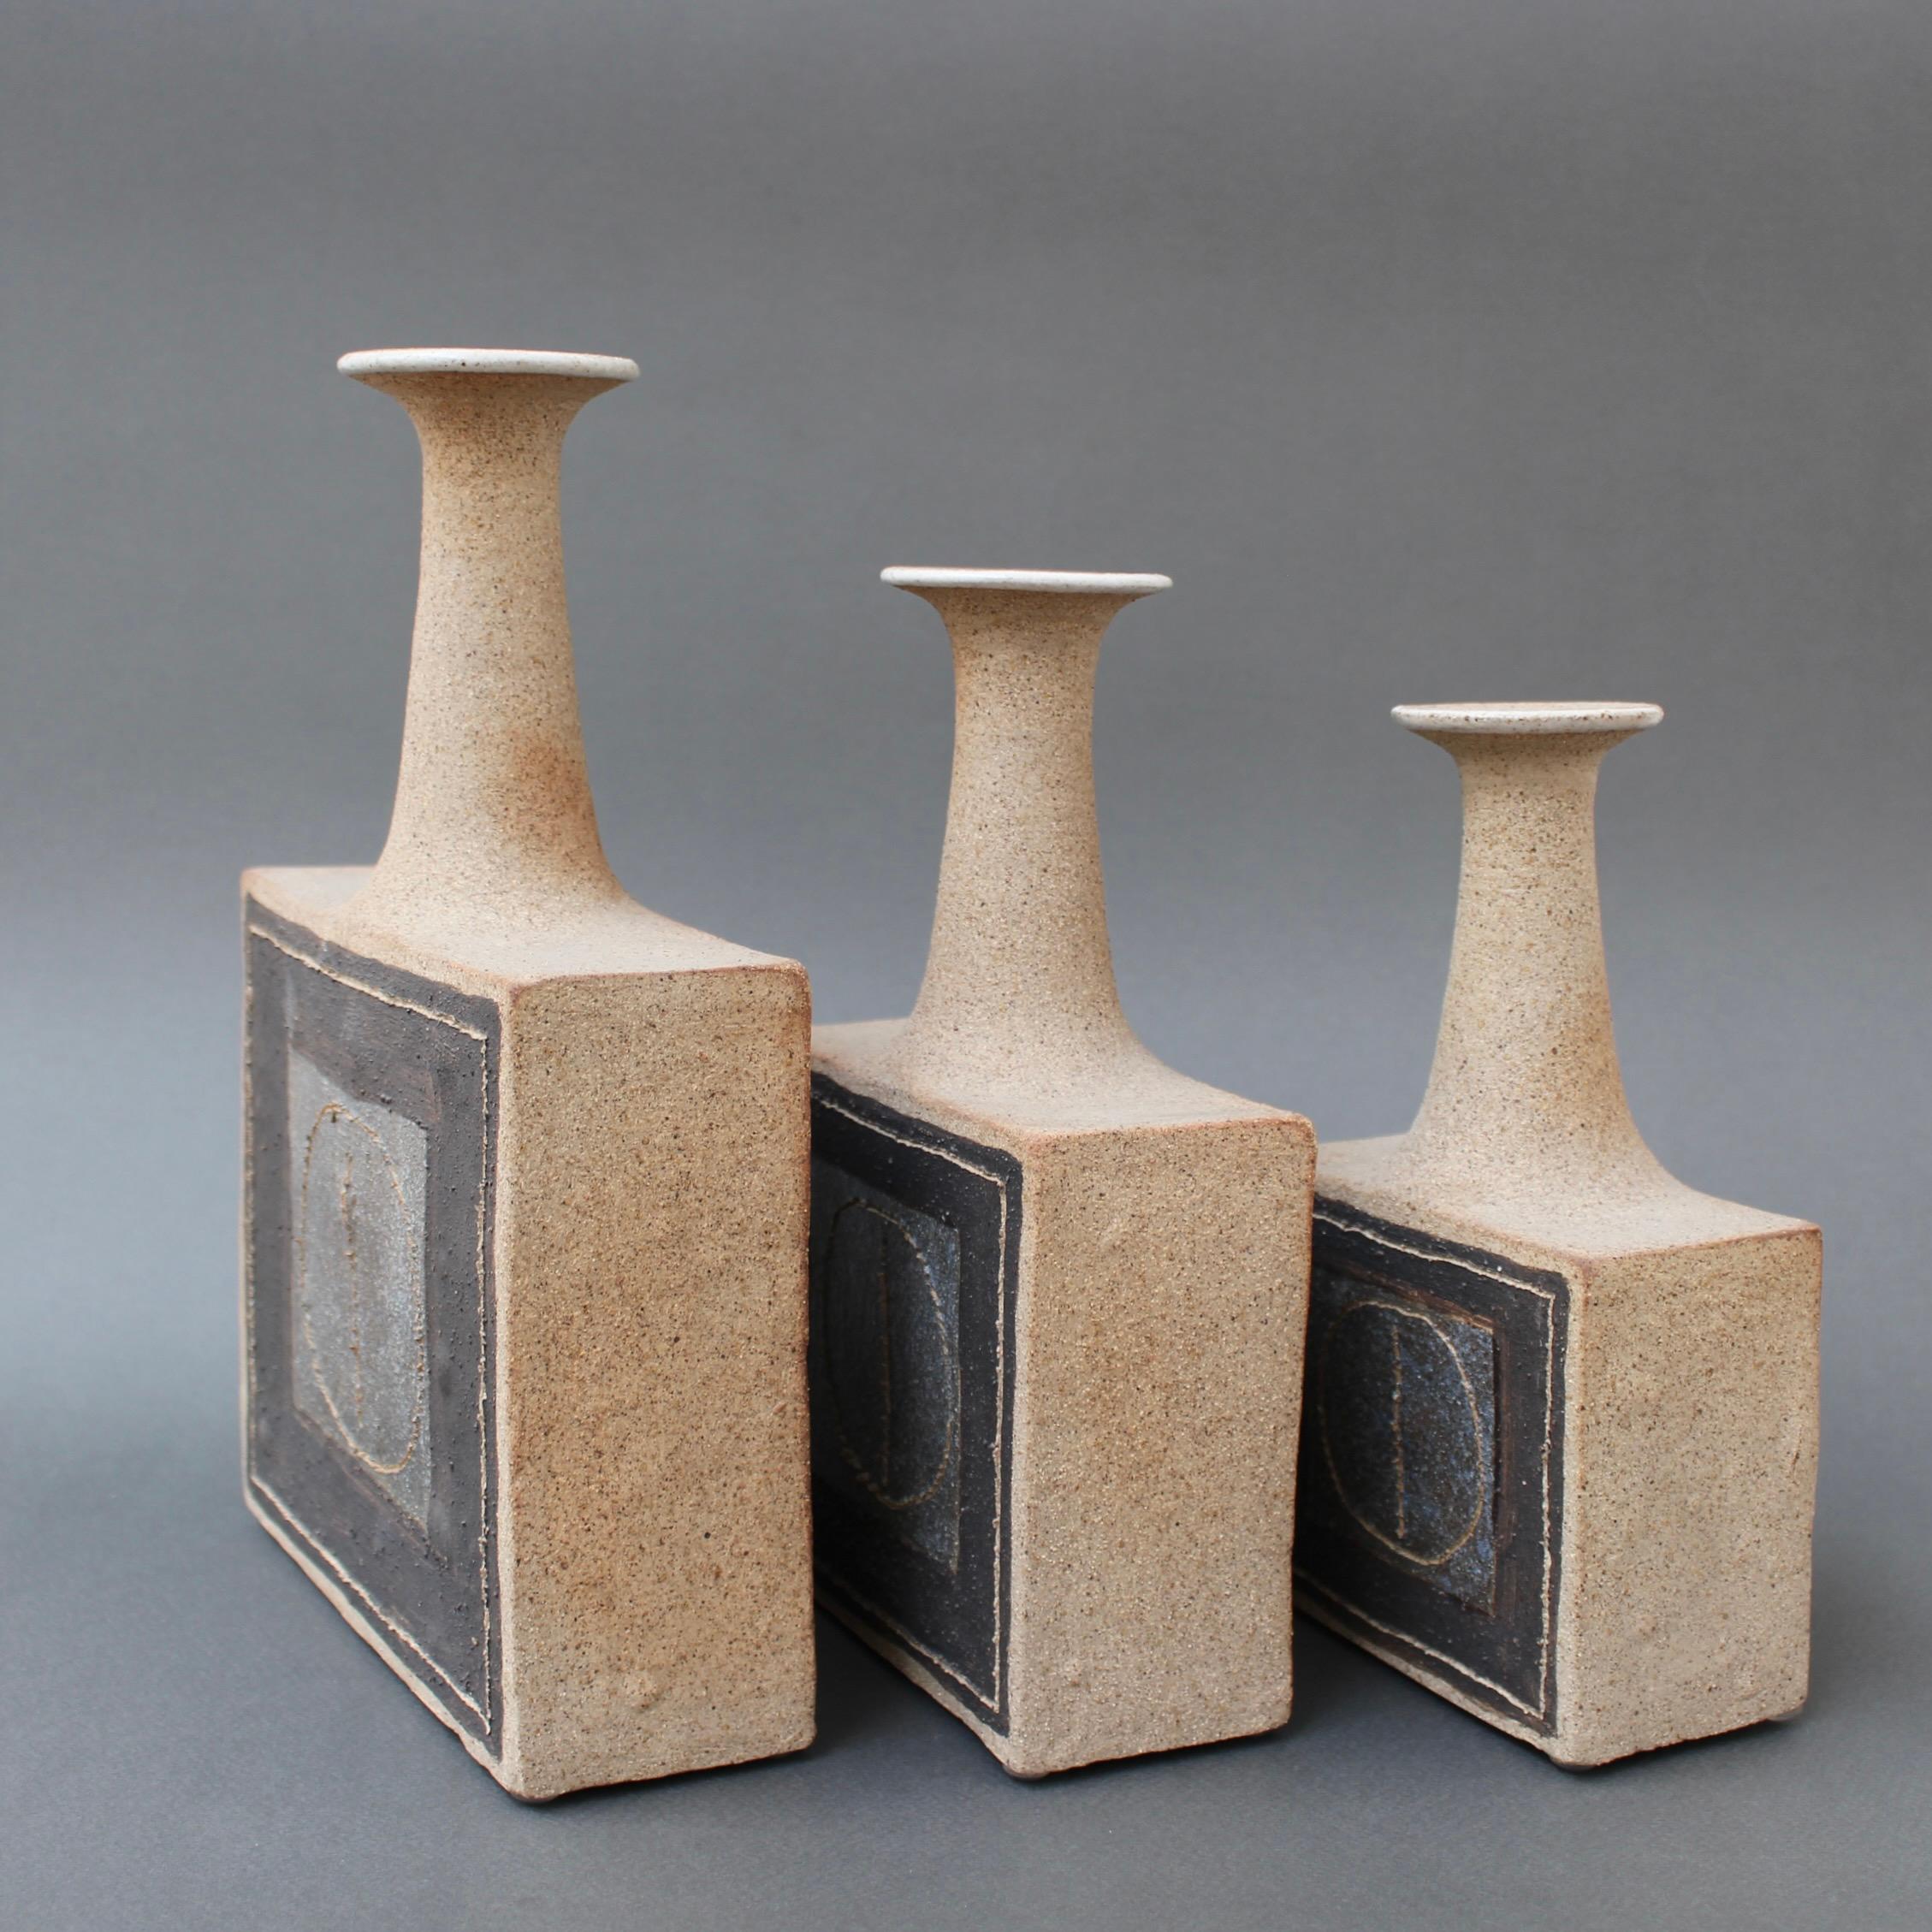 Trio of Italian Stoneware Vases with Abstract Motif by Bruno Gambone, c. 1990s For Sale 2